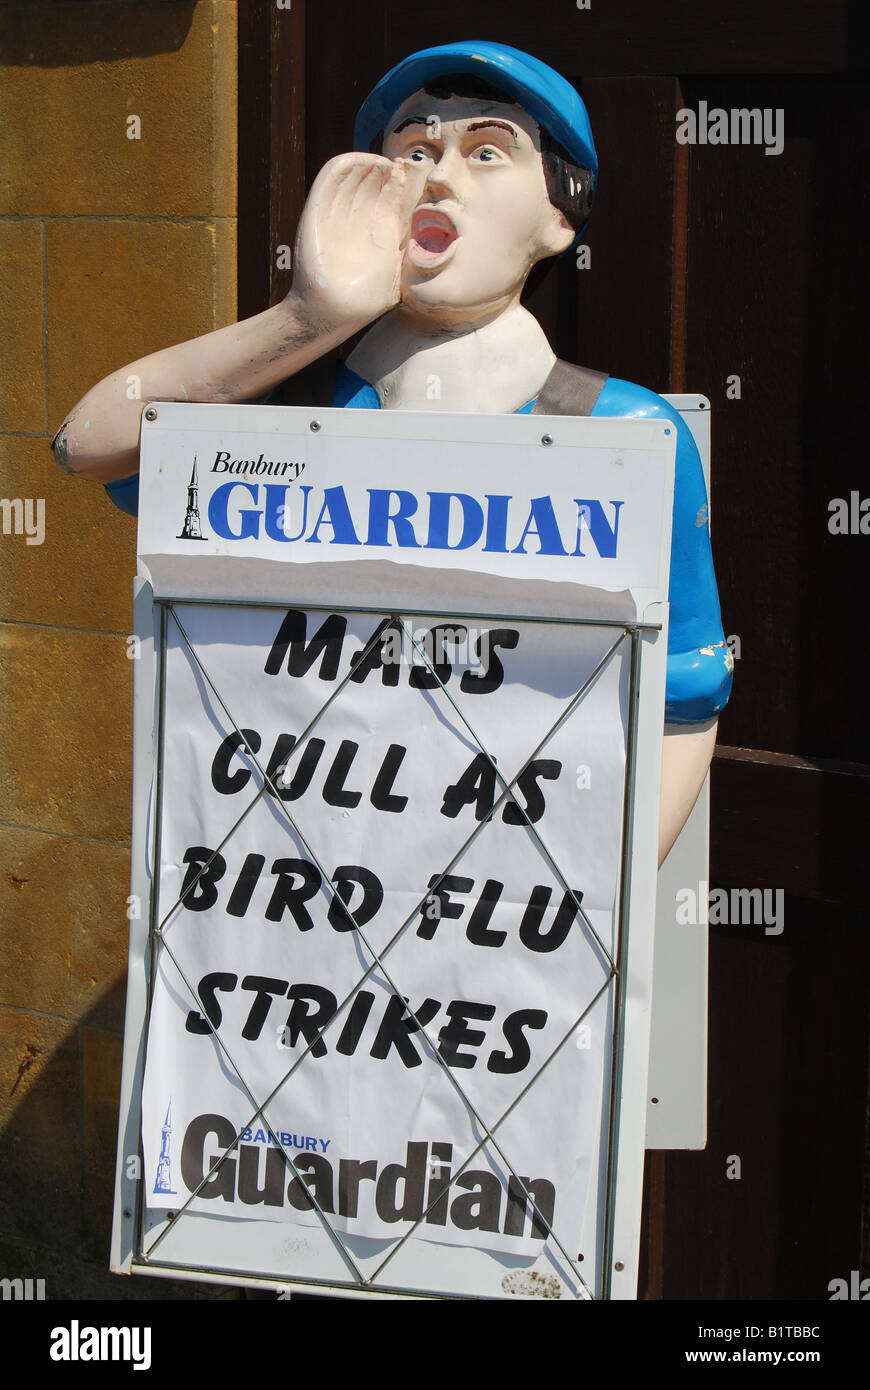 Paper-boy stand avec Banbury Guardian newspaper headlines , High Street, Chipping Norton, Oxfordshire, Angleterre, Royaume-Uni Banque D'Images